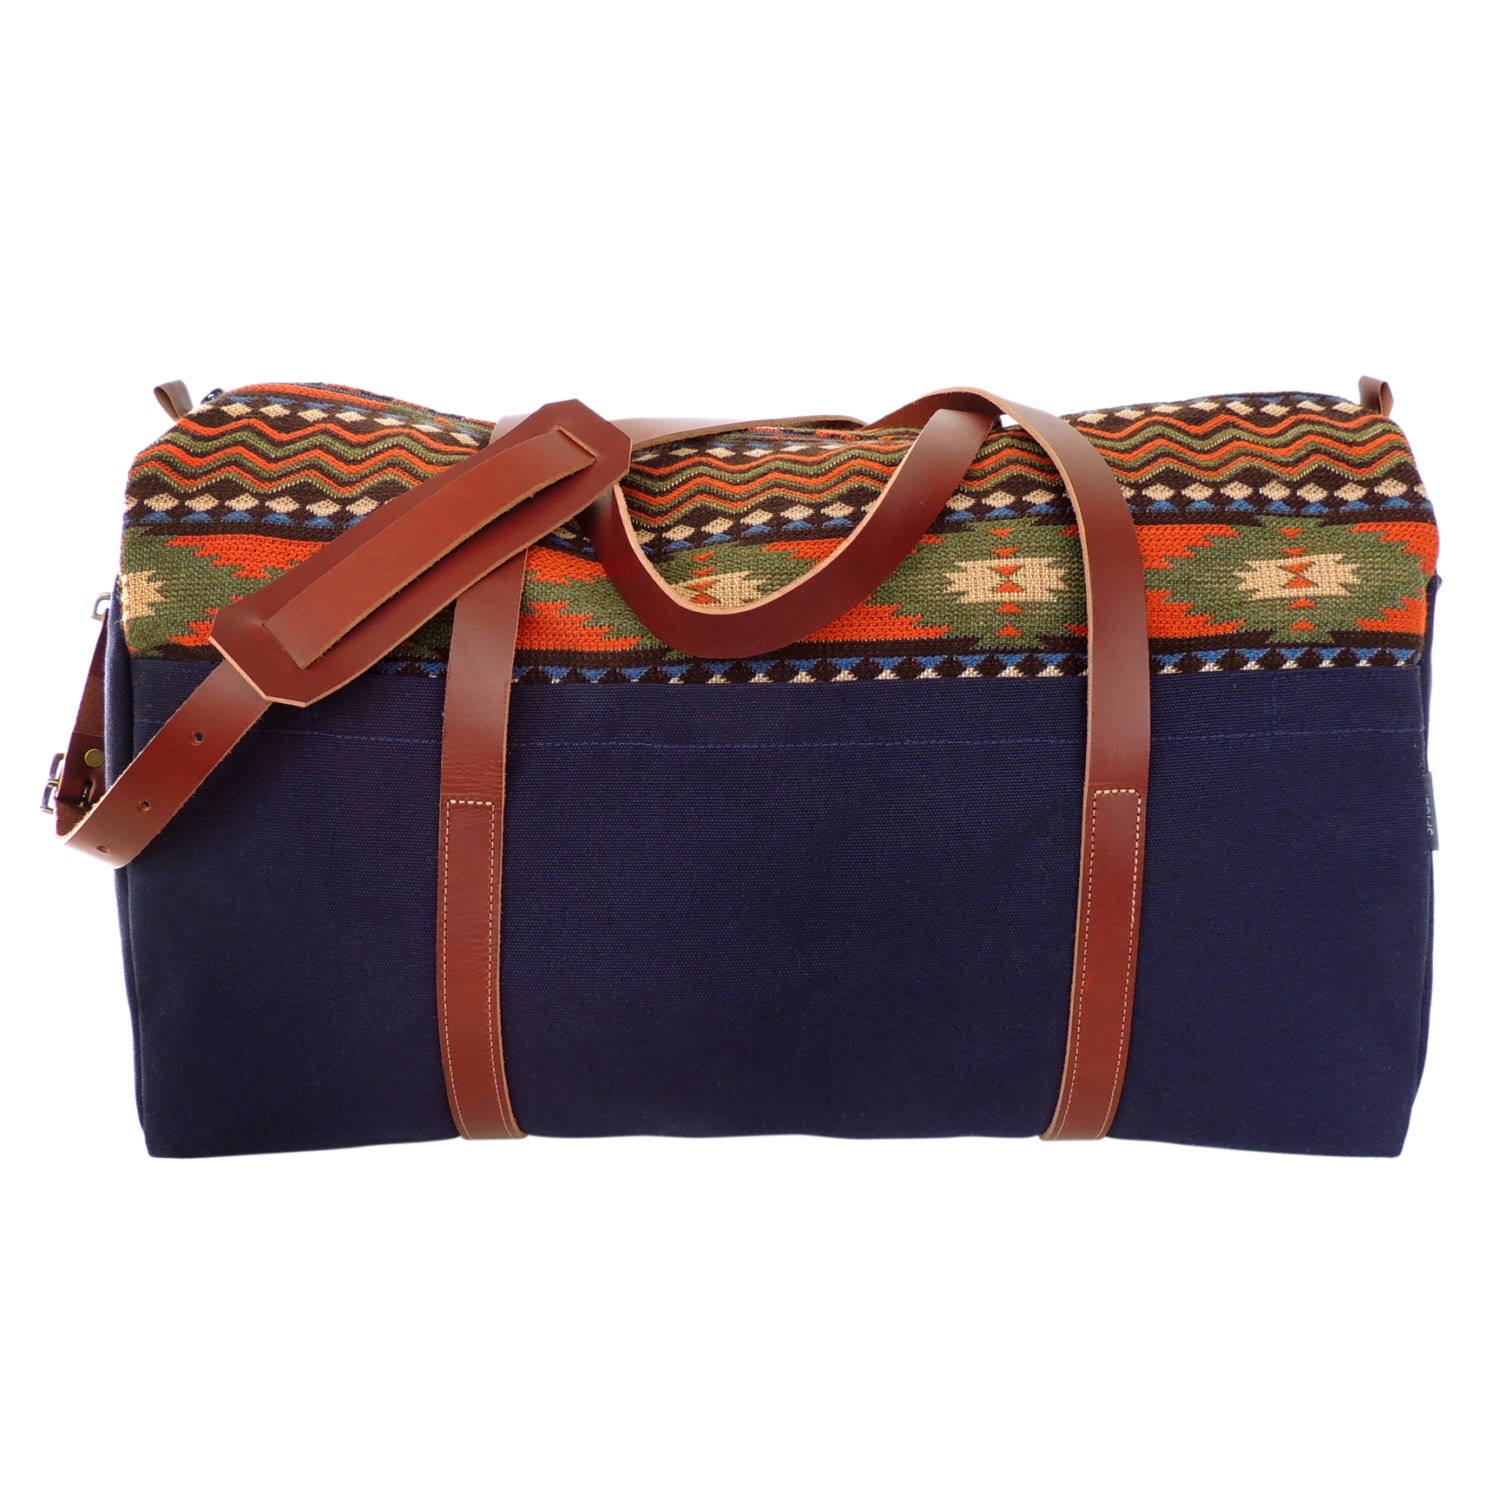 SALE Duffle Bag in Navy Canvas with Leather Strap by SpicerBags